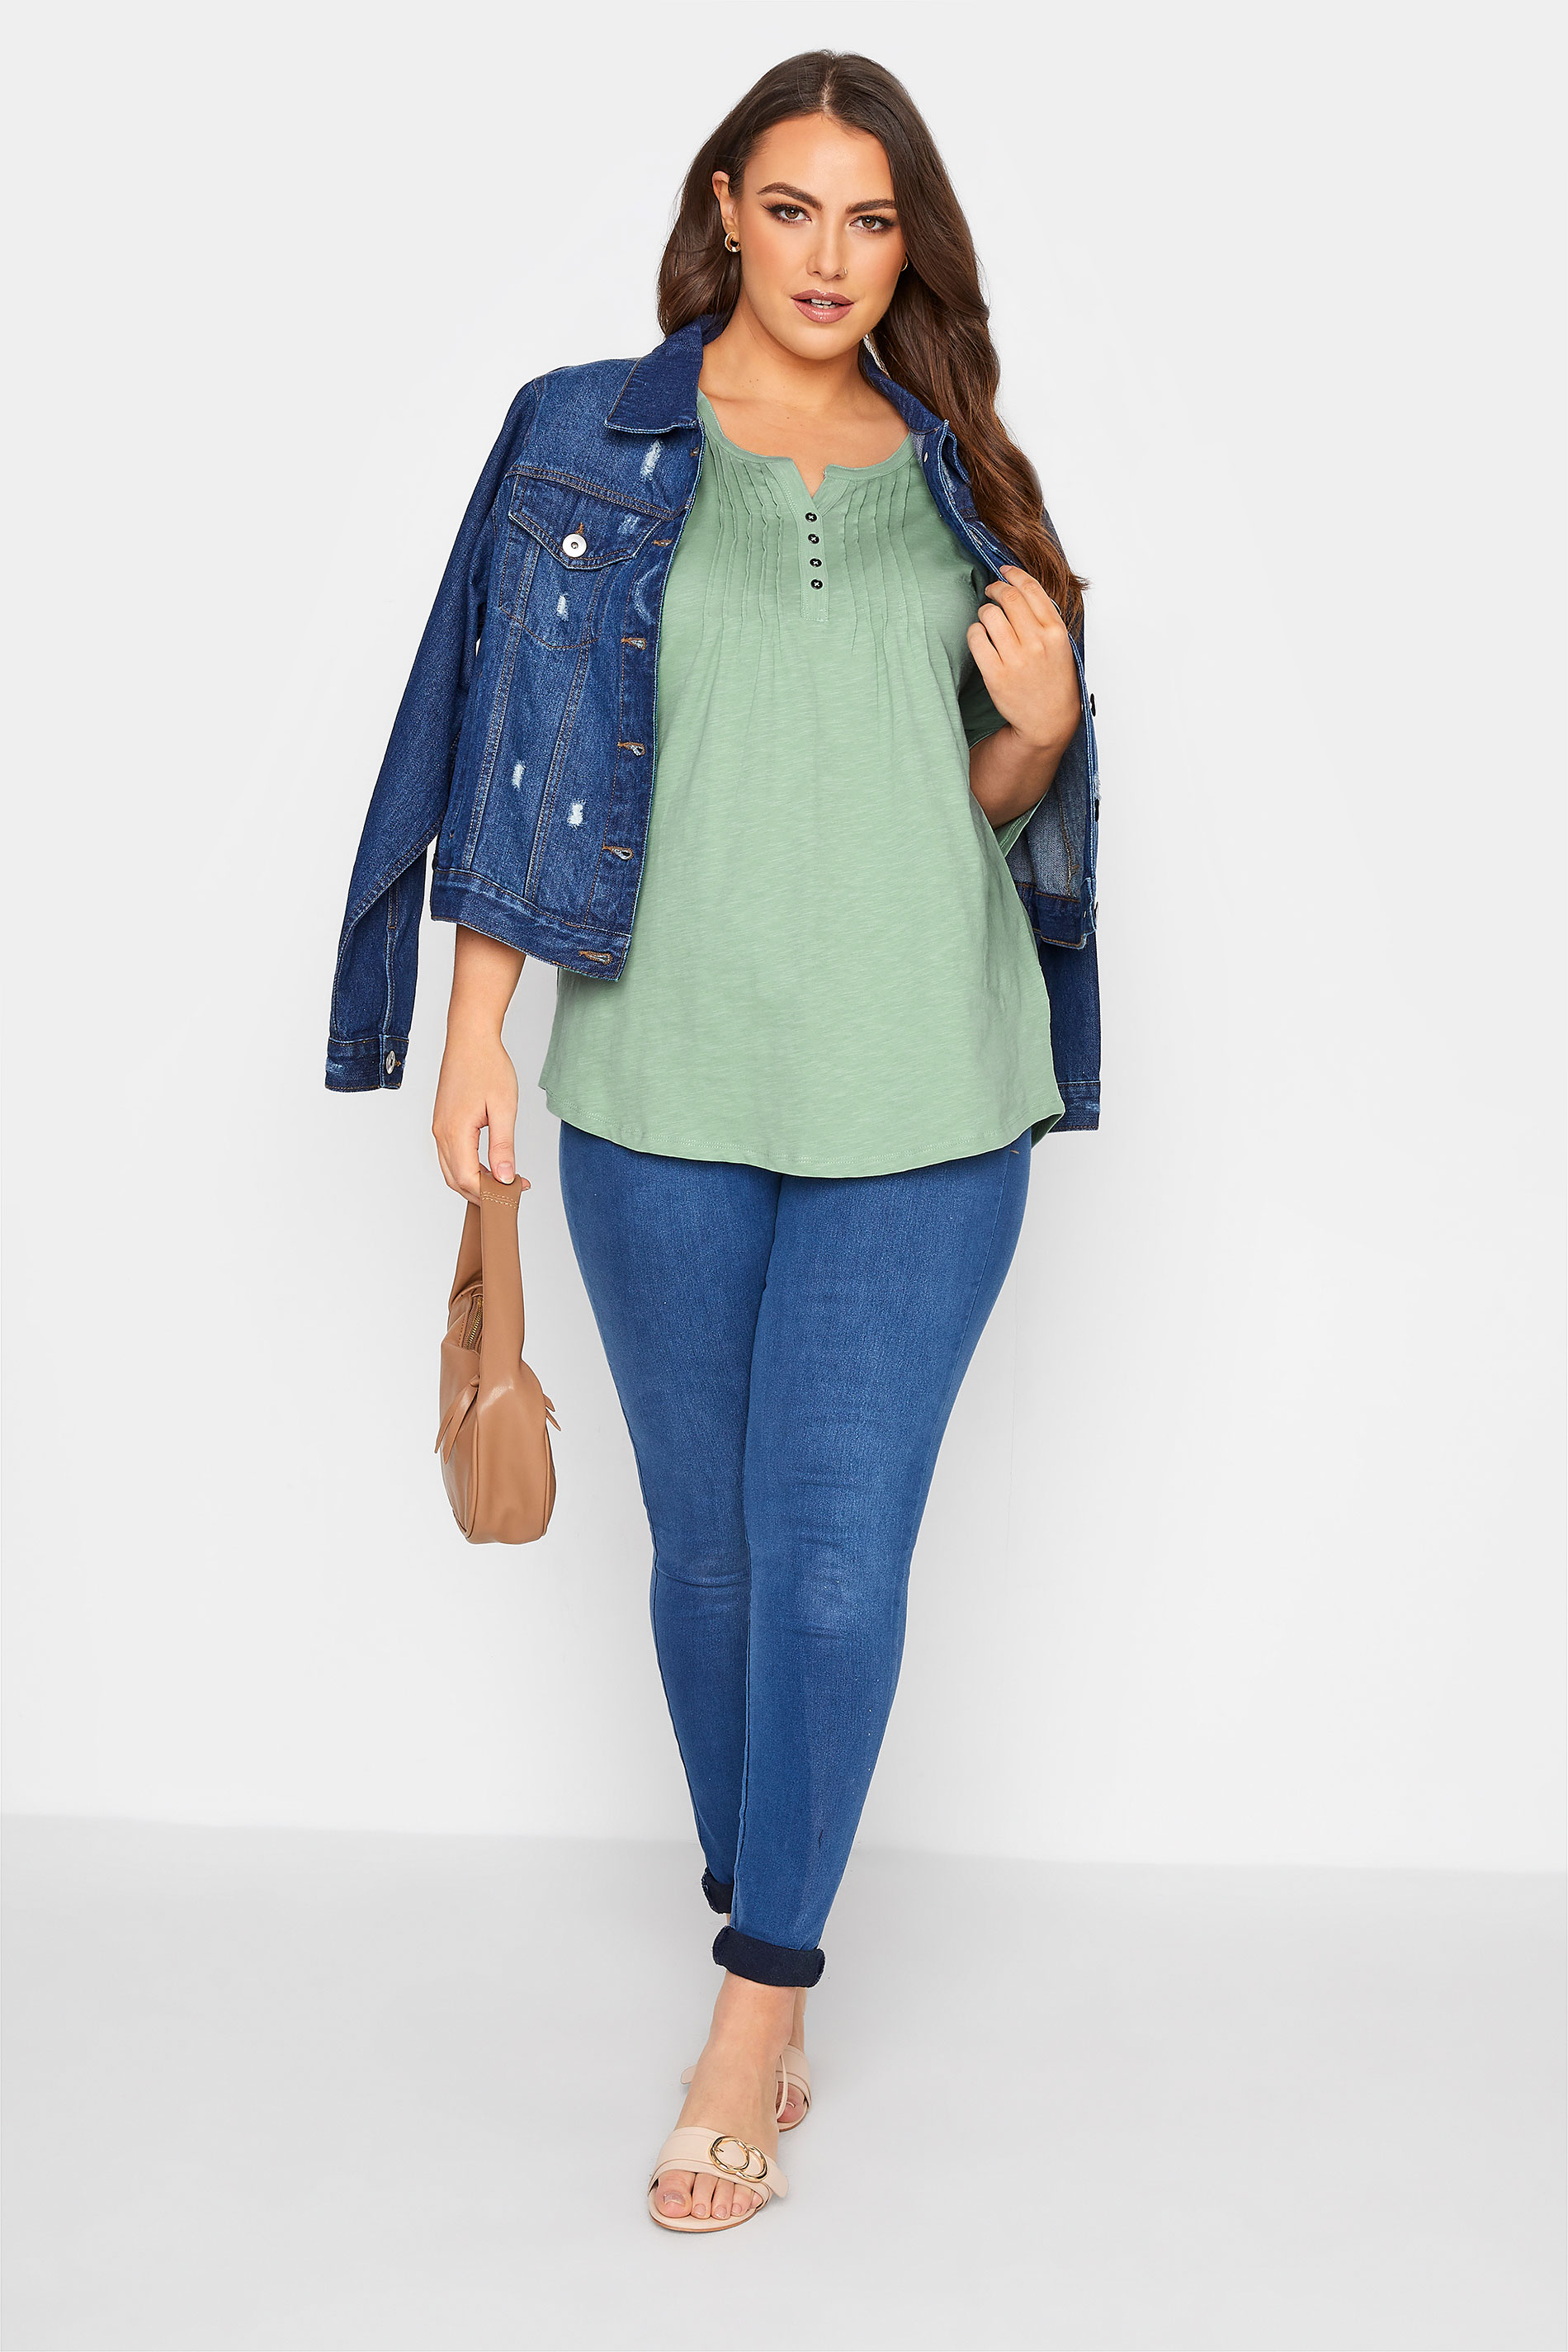 Grande taille  Tops Grande taille  Tops Casual | YOURS FOR GOOD - Top Vert Pastel - YI92309